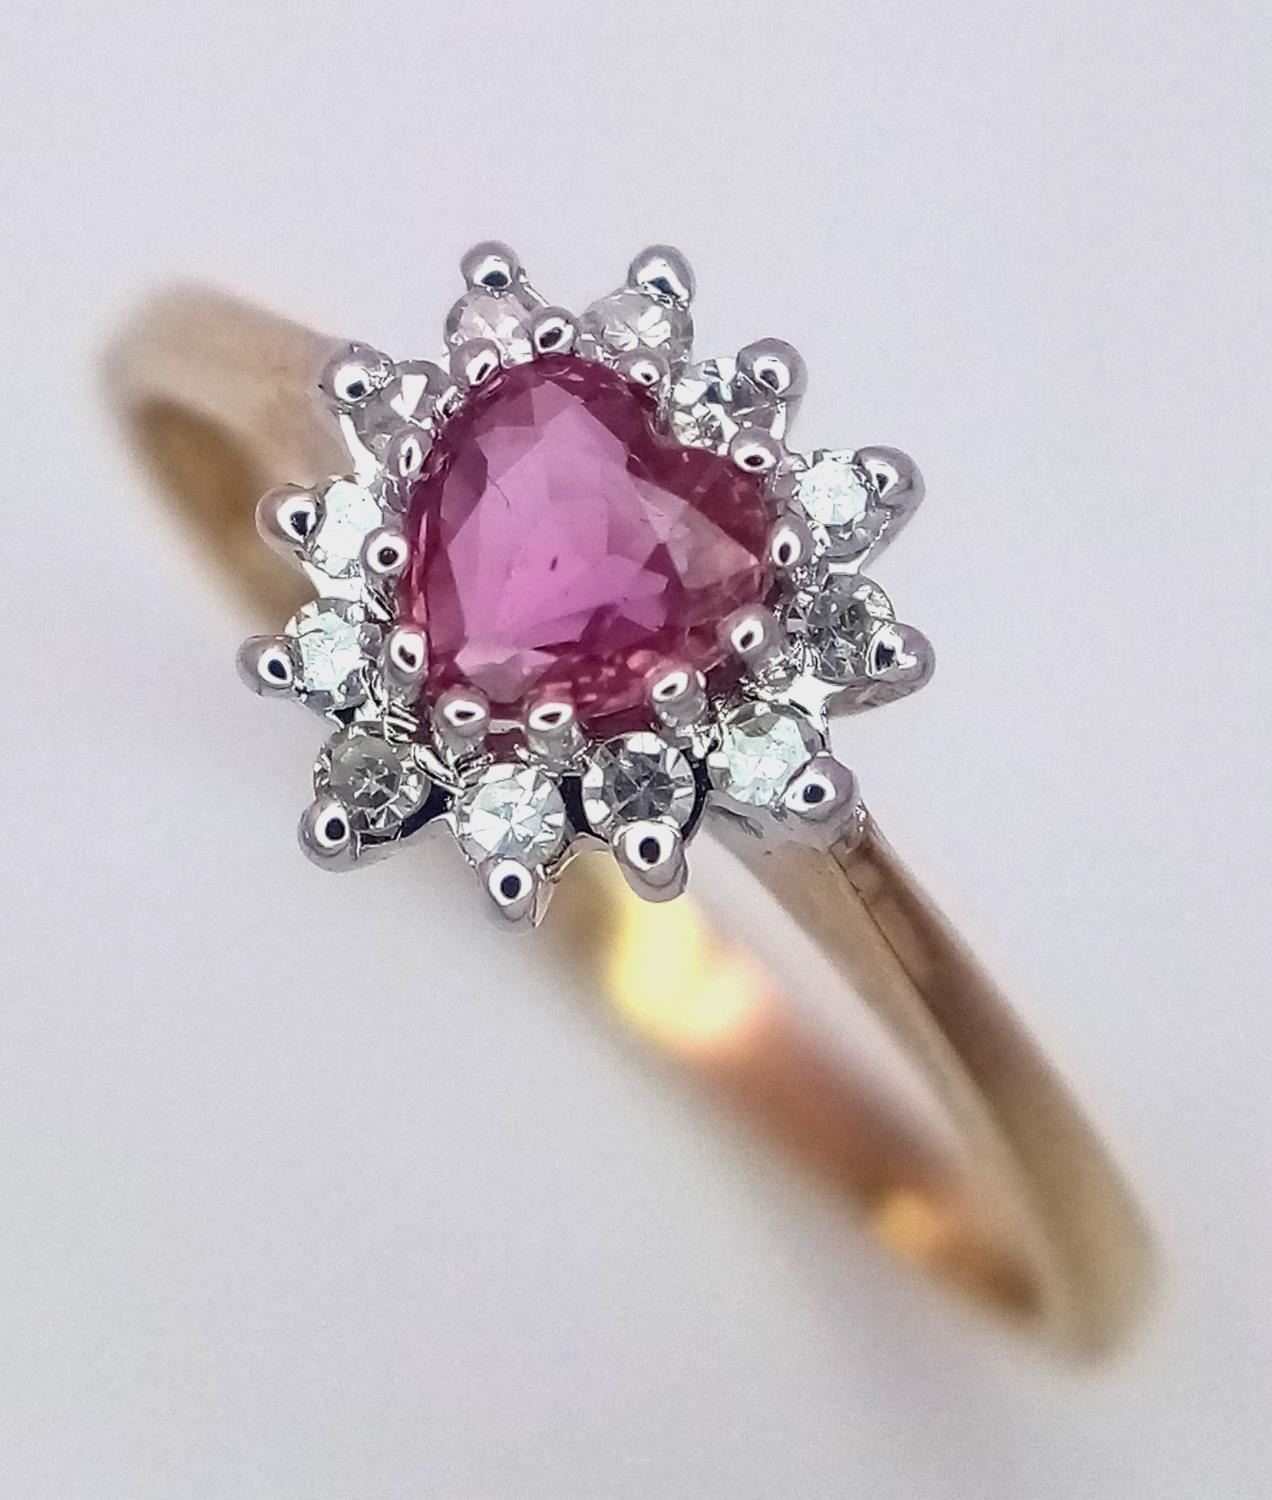 A 9K YELLOW GOLD DIAMOND & PINK SAPPHIRE HEART RING 1.6G SIZE N. ref: SPAS 9010 - Image 3 of 5